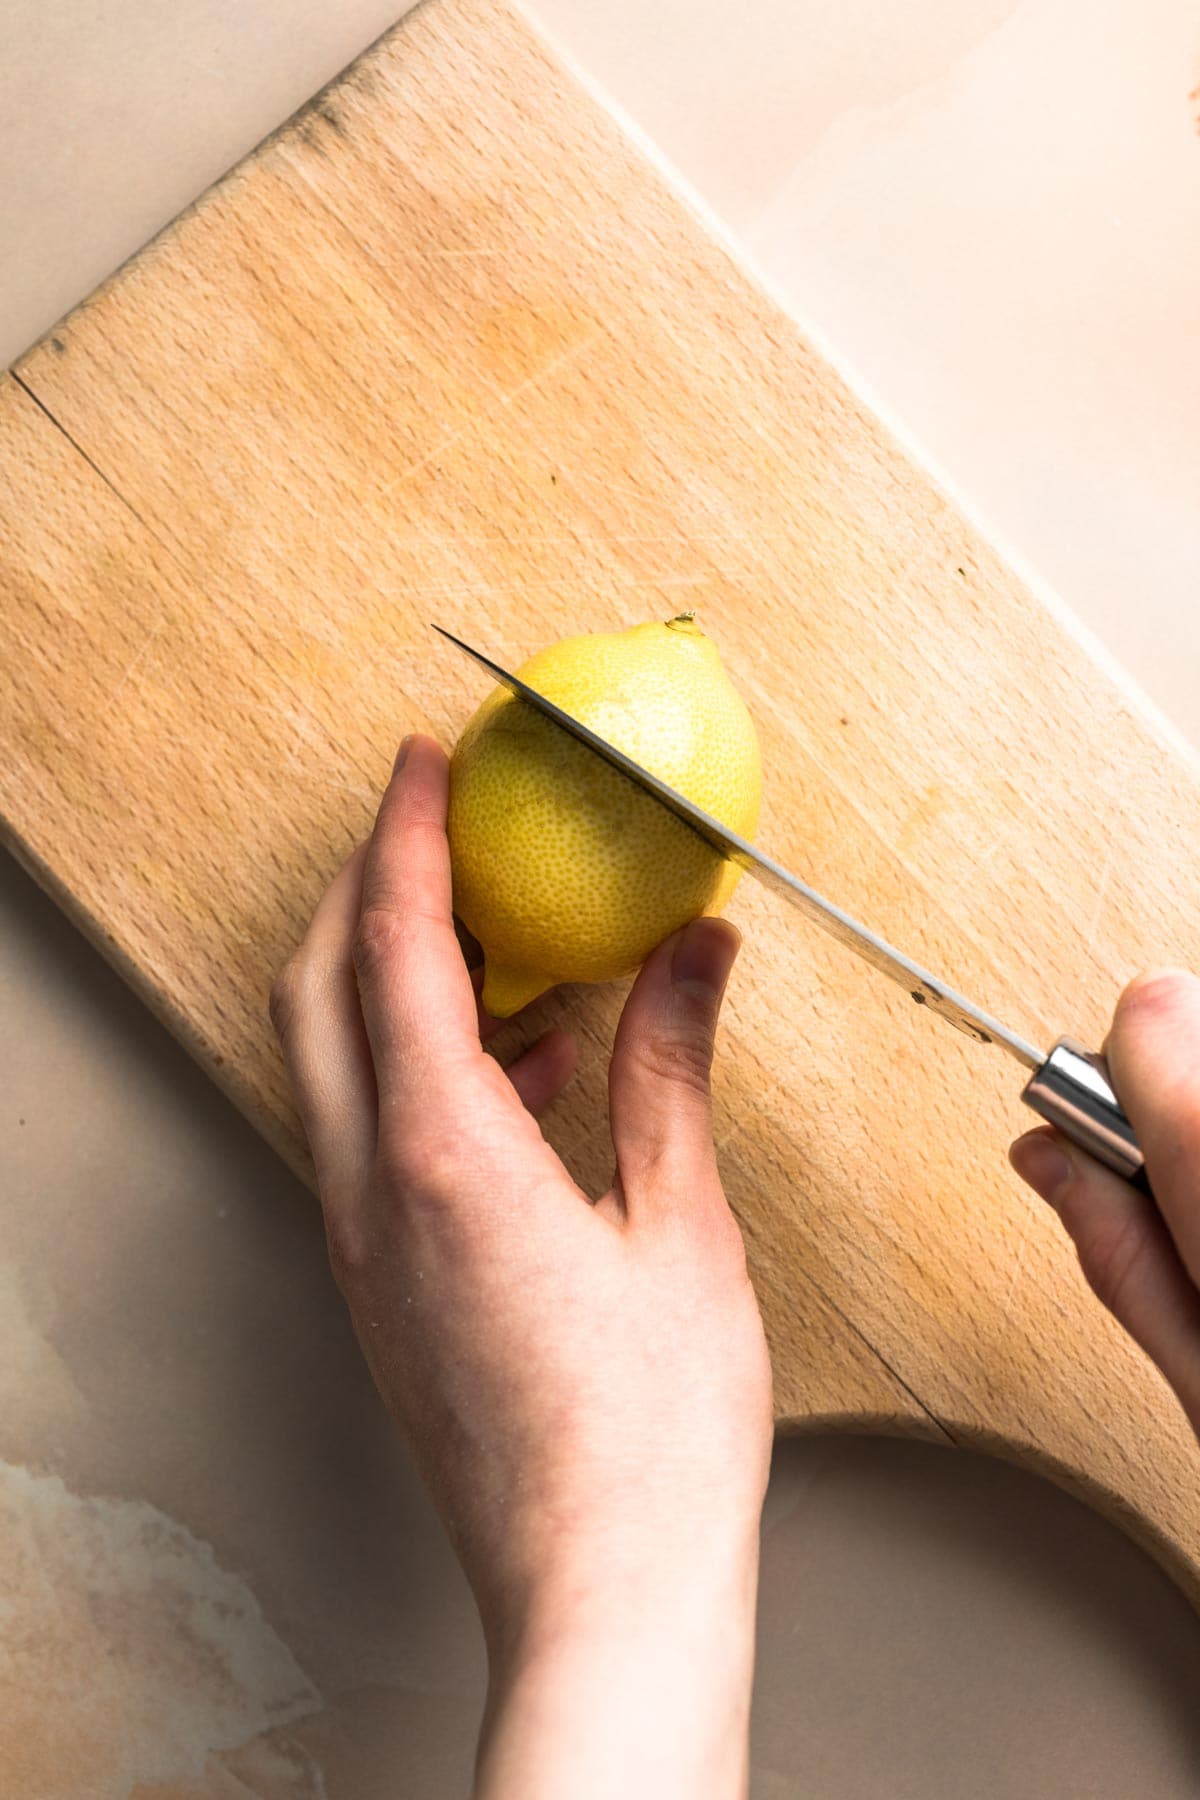 Lemon being sliced in half with a knife.